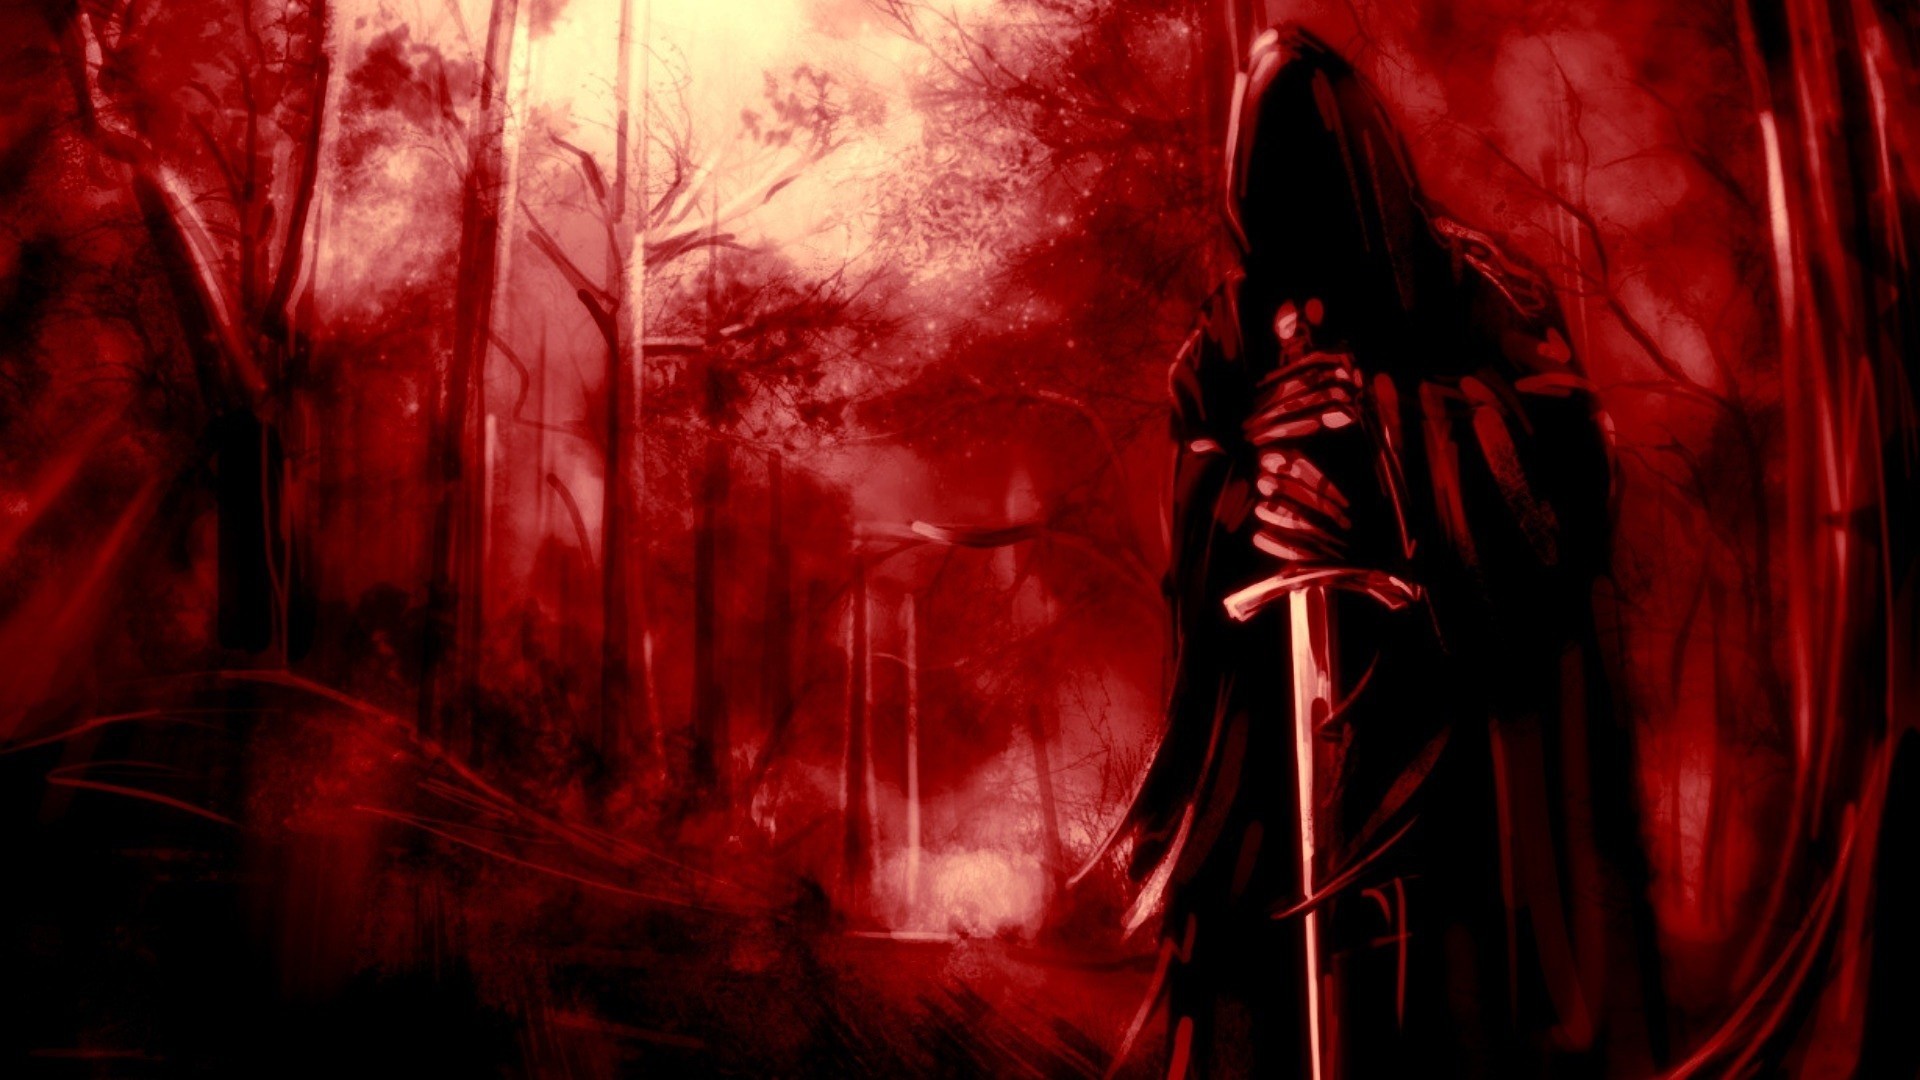 General 1920x1080 The Lord of the Rings Nazgûl fantasy art sword red background